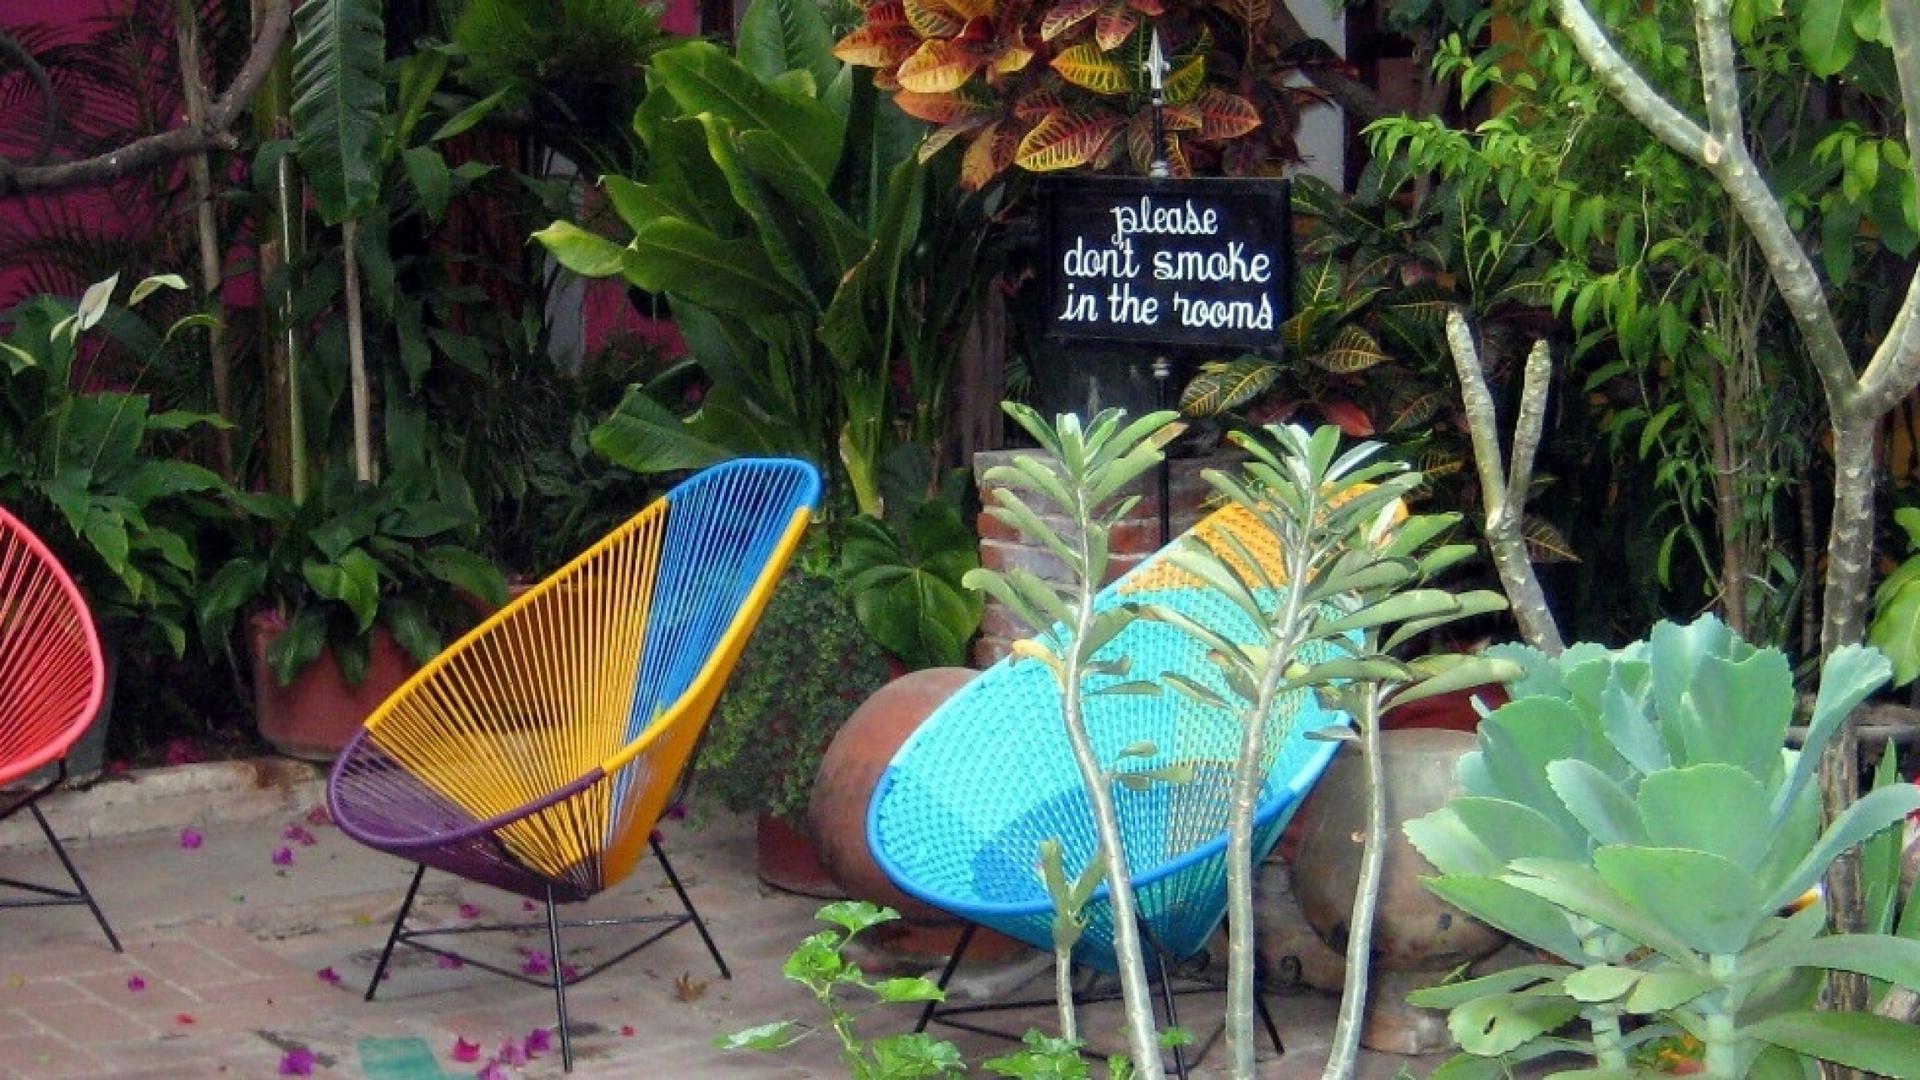 A colorful patio with chairs and greenery and a no-smoking sign